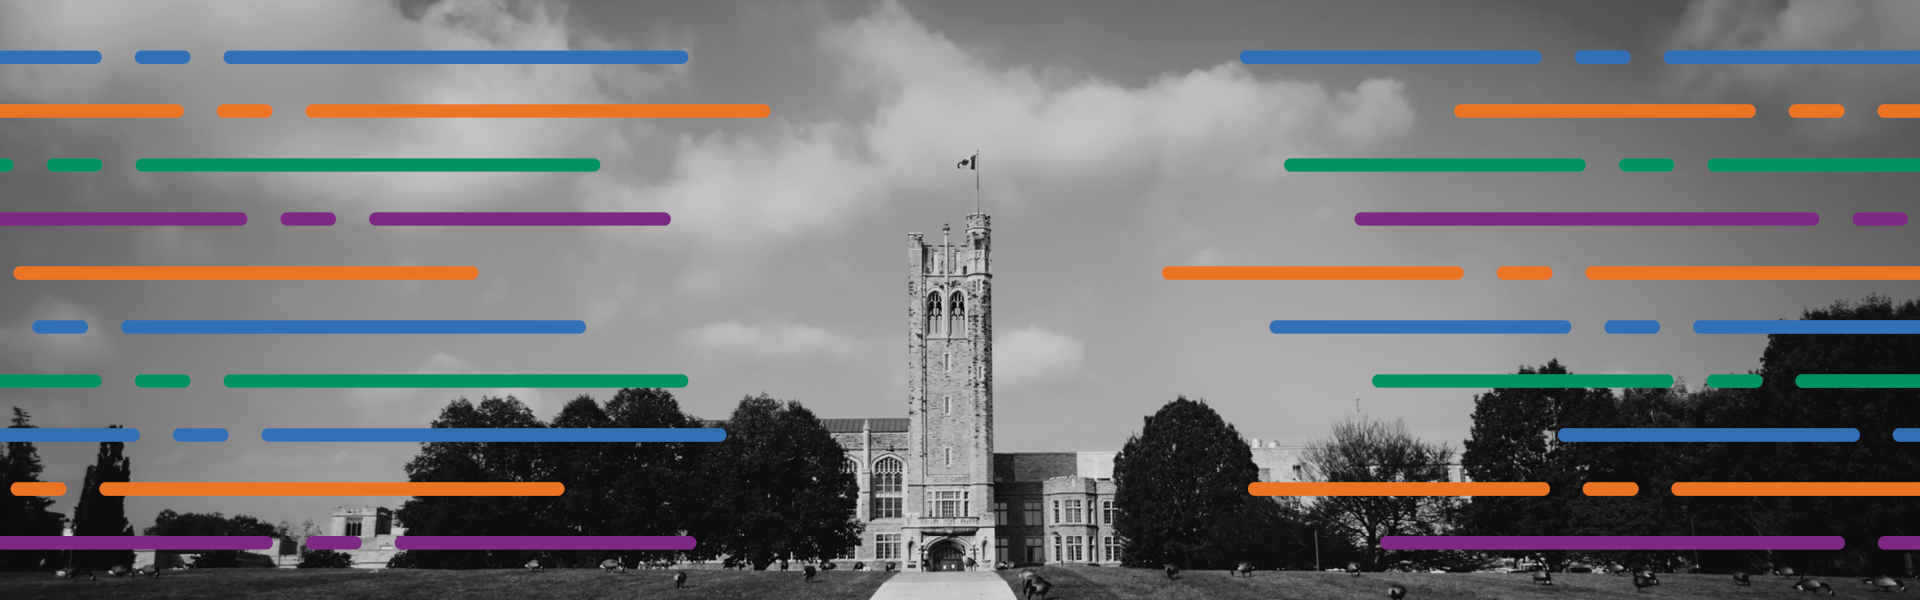 Black and white image of University College with coloured stripes layered overtop